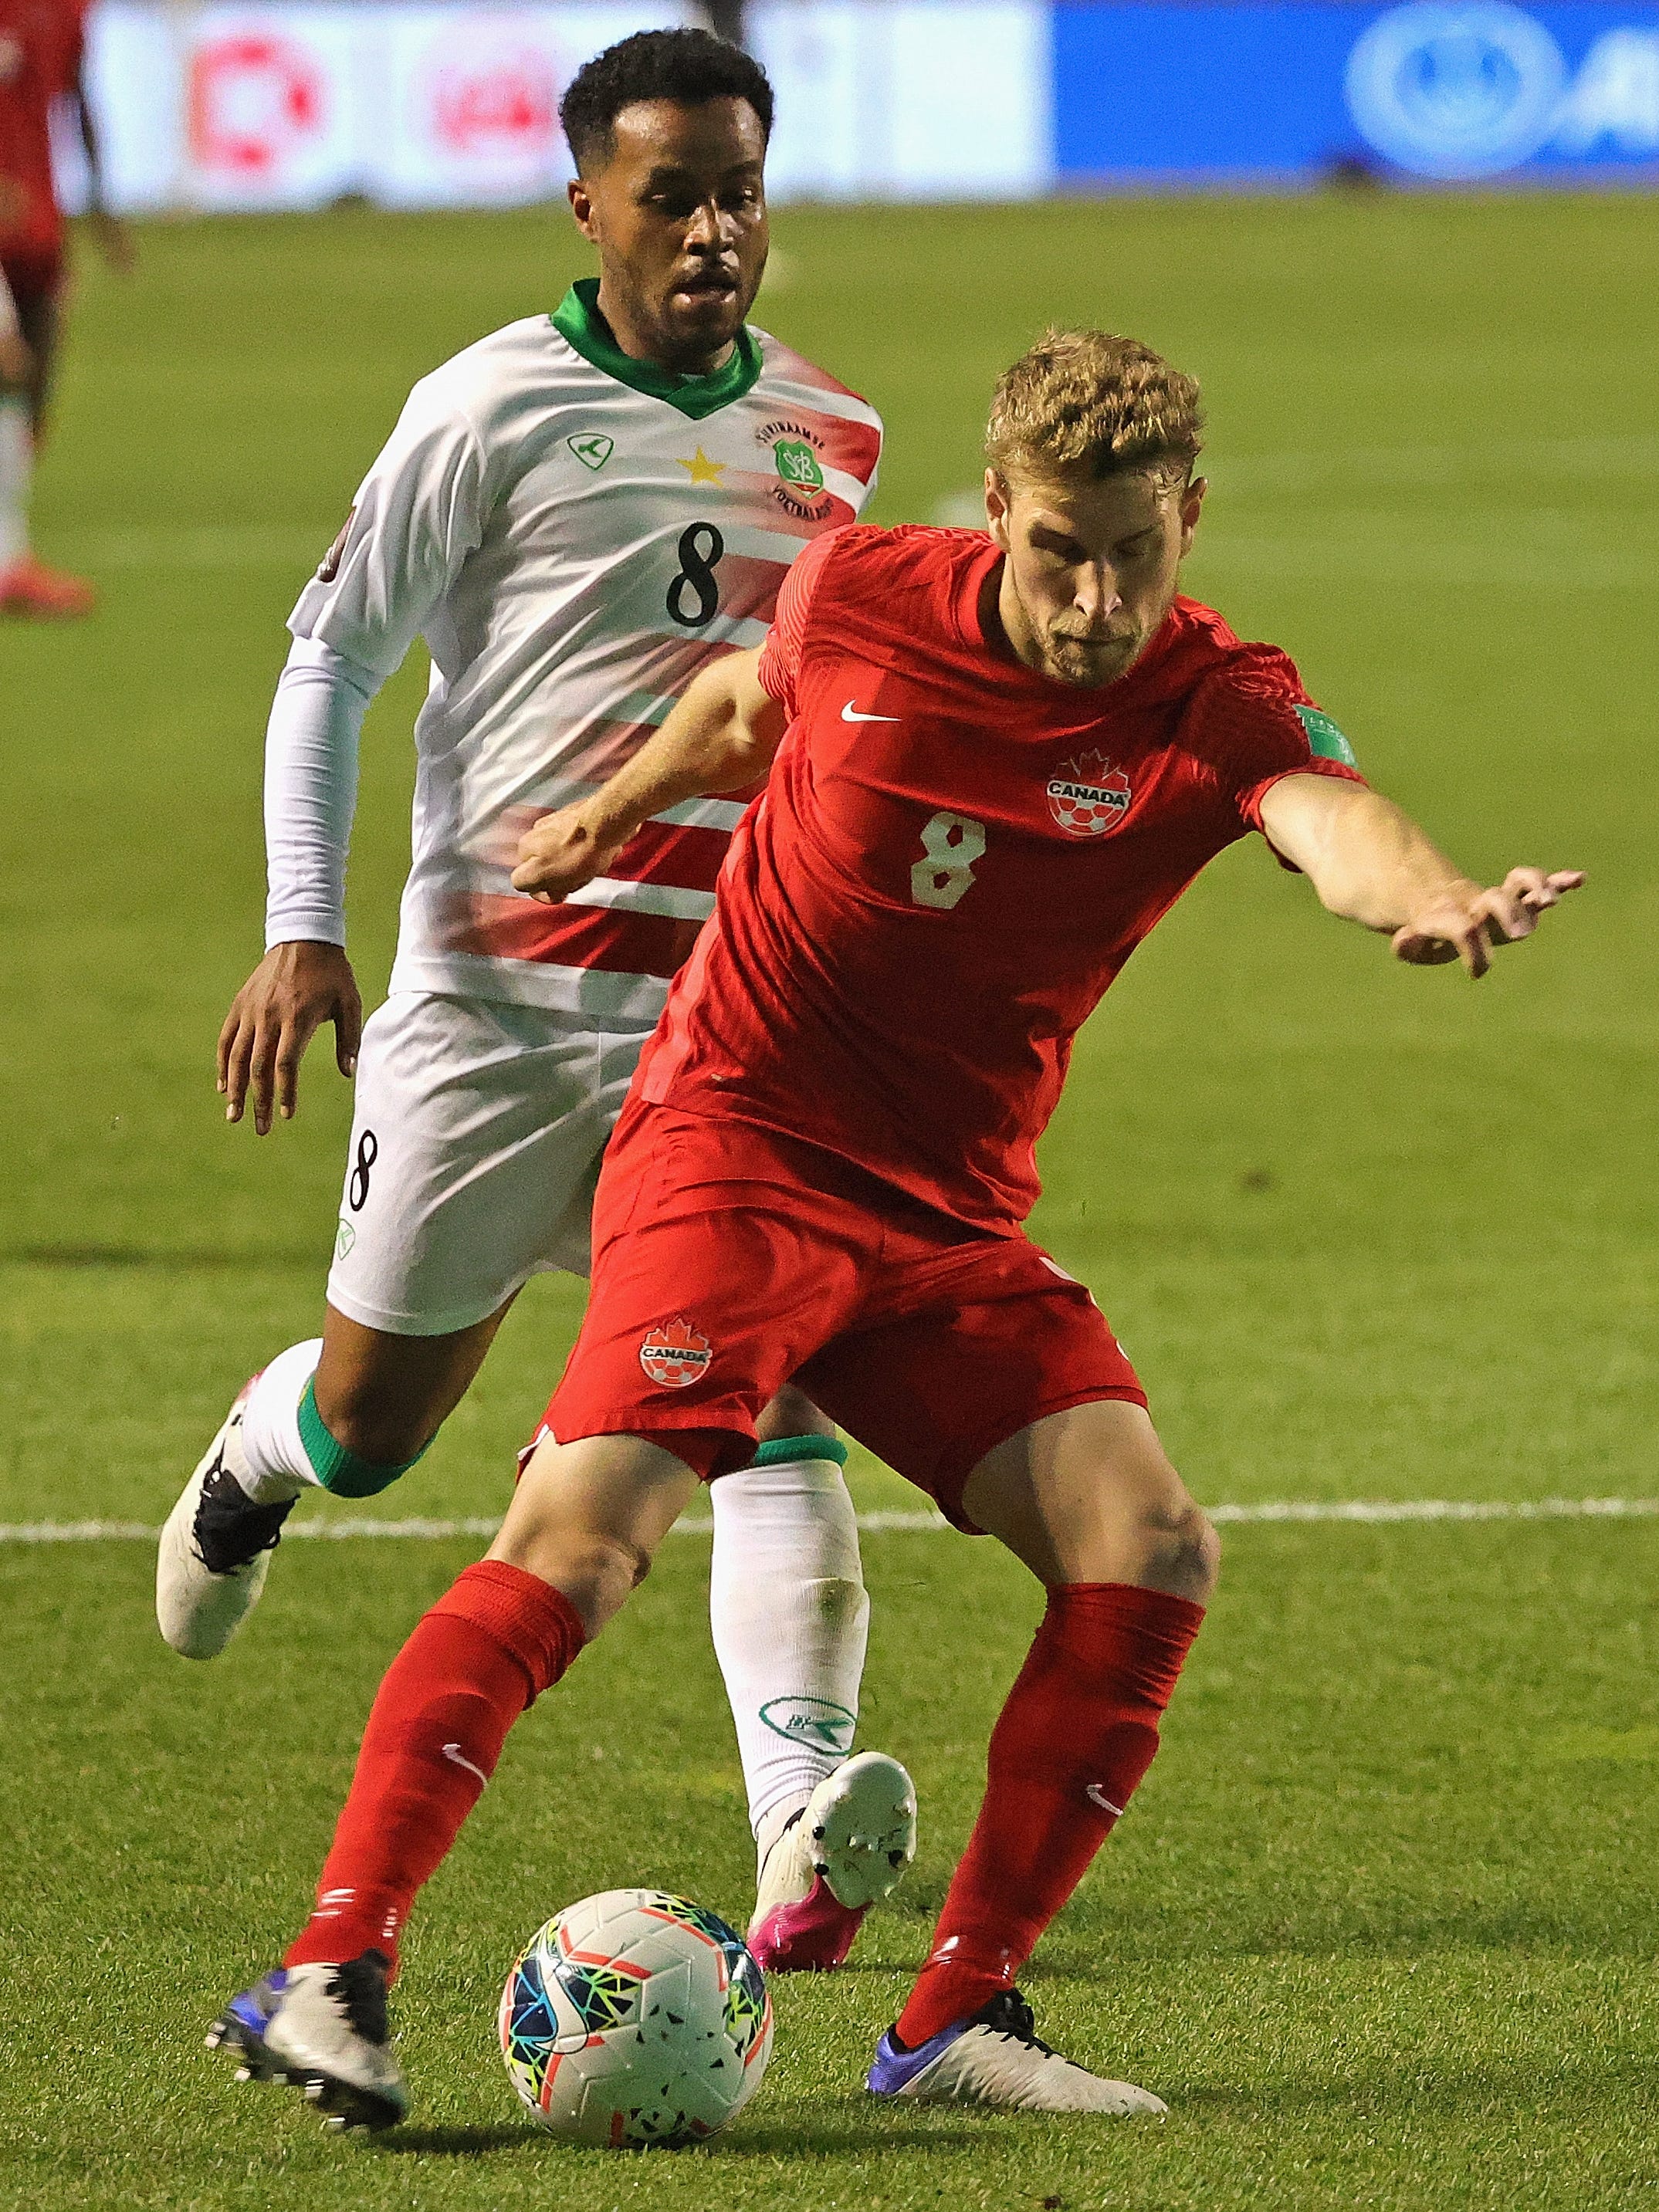 An action image of David Wotherspoon playing soccer.